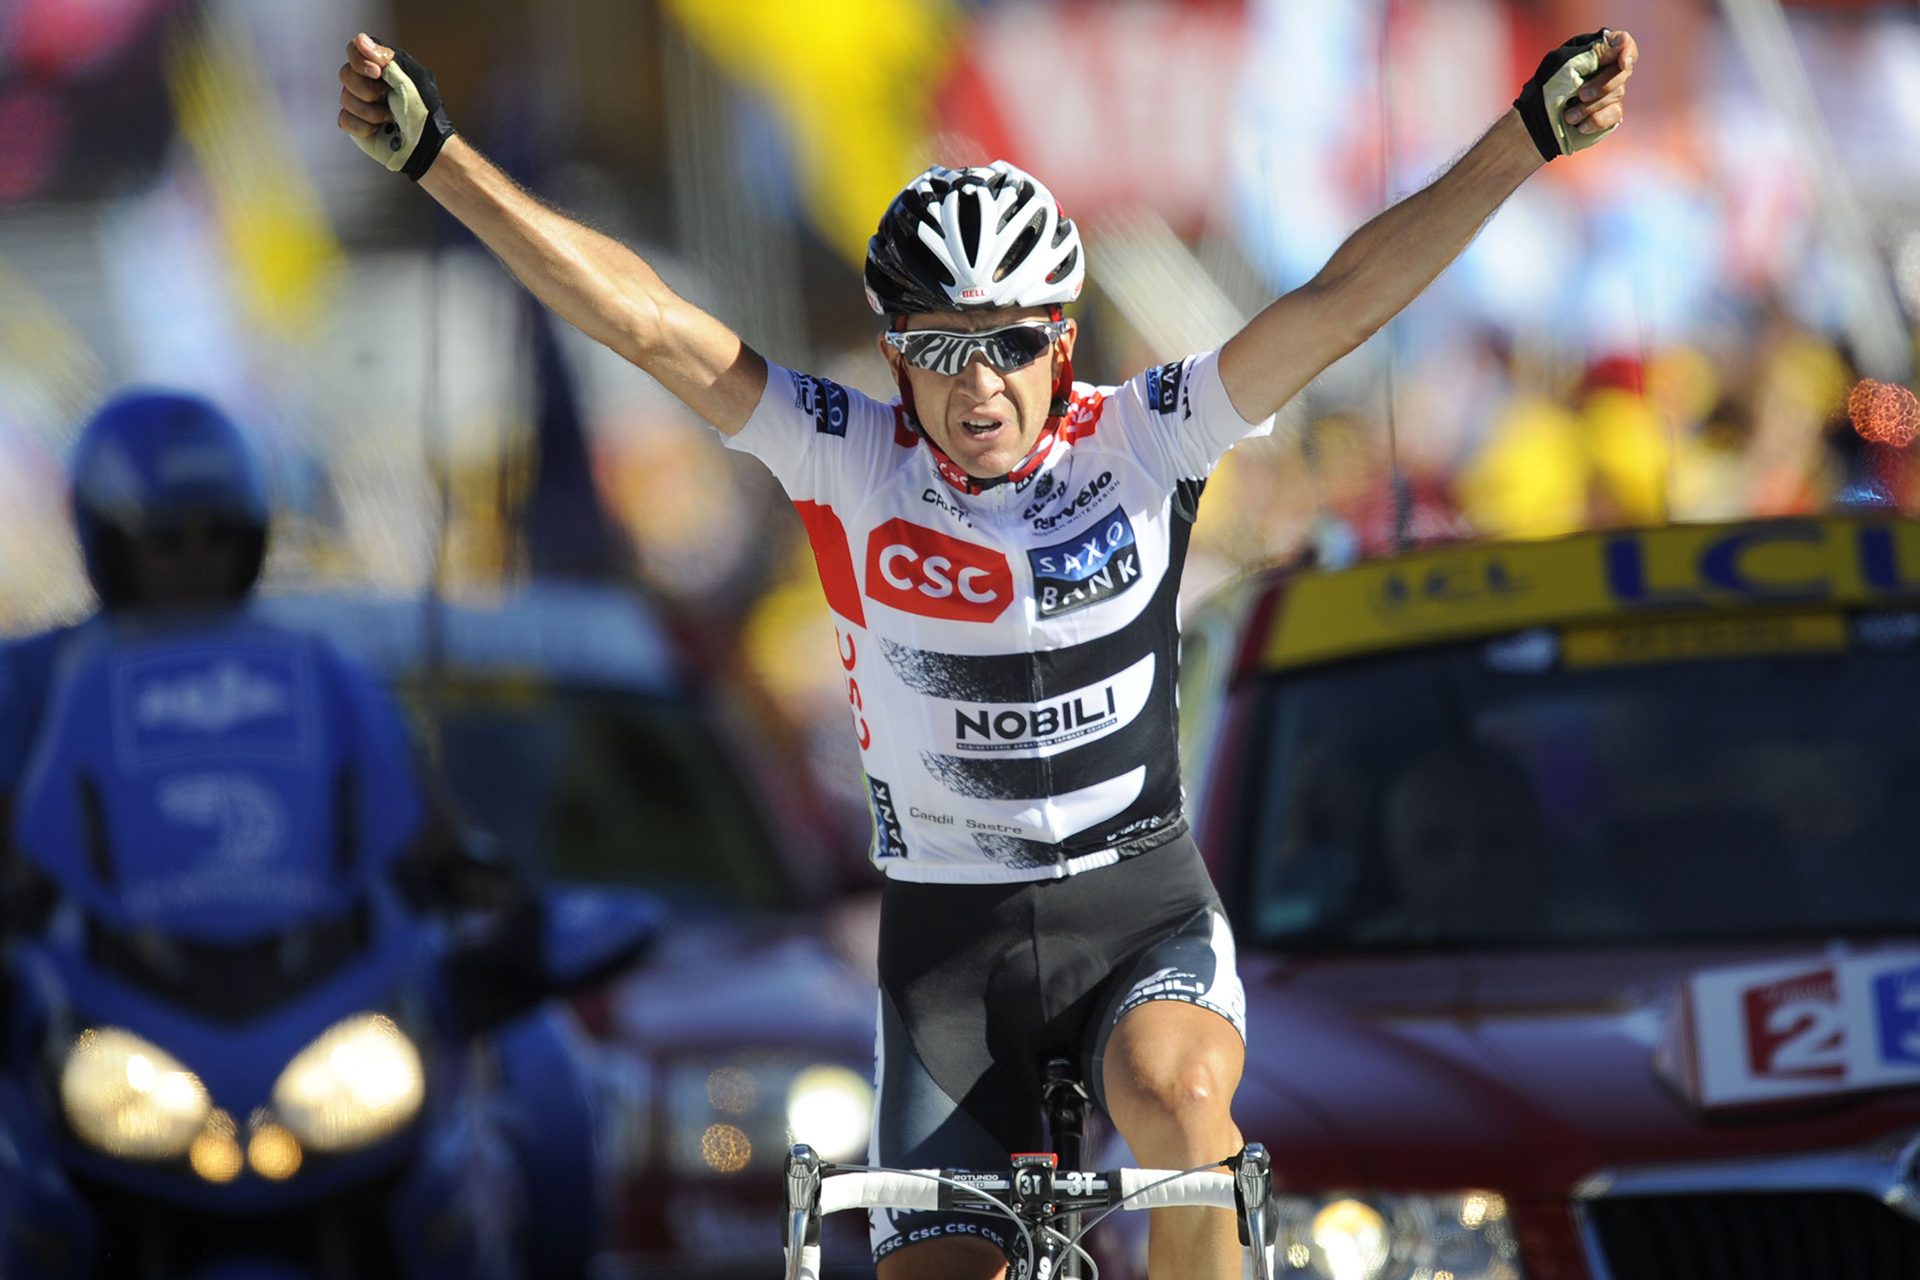 A historic victory at Alpe d'Huez